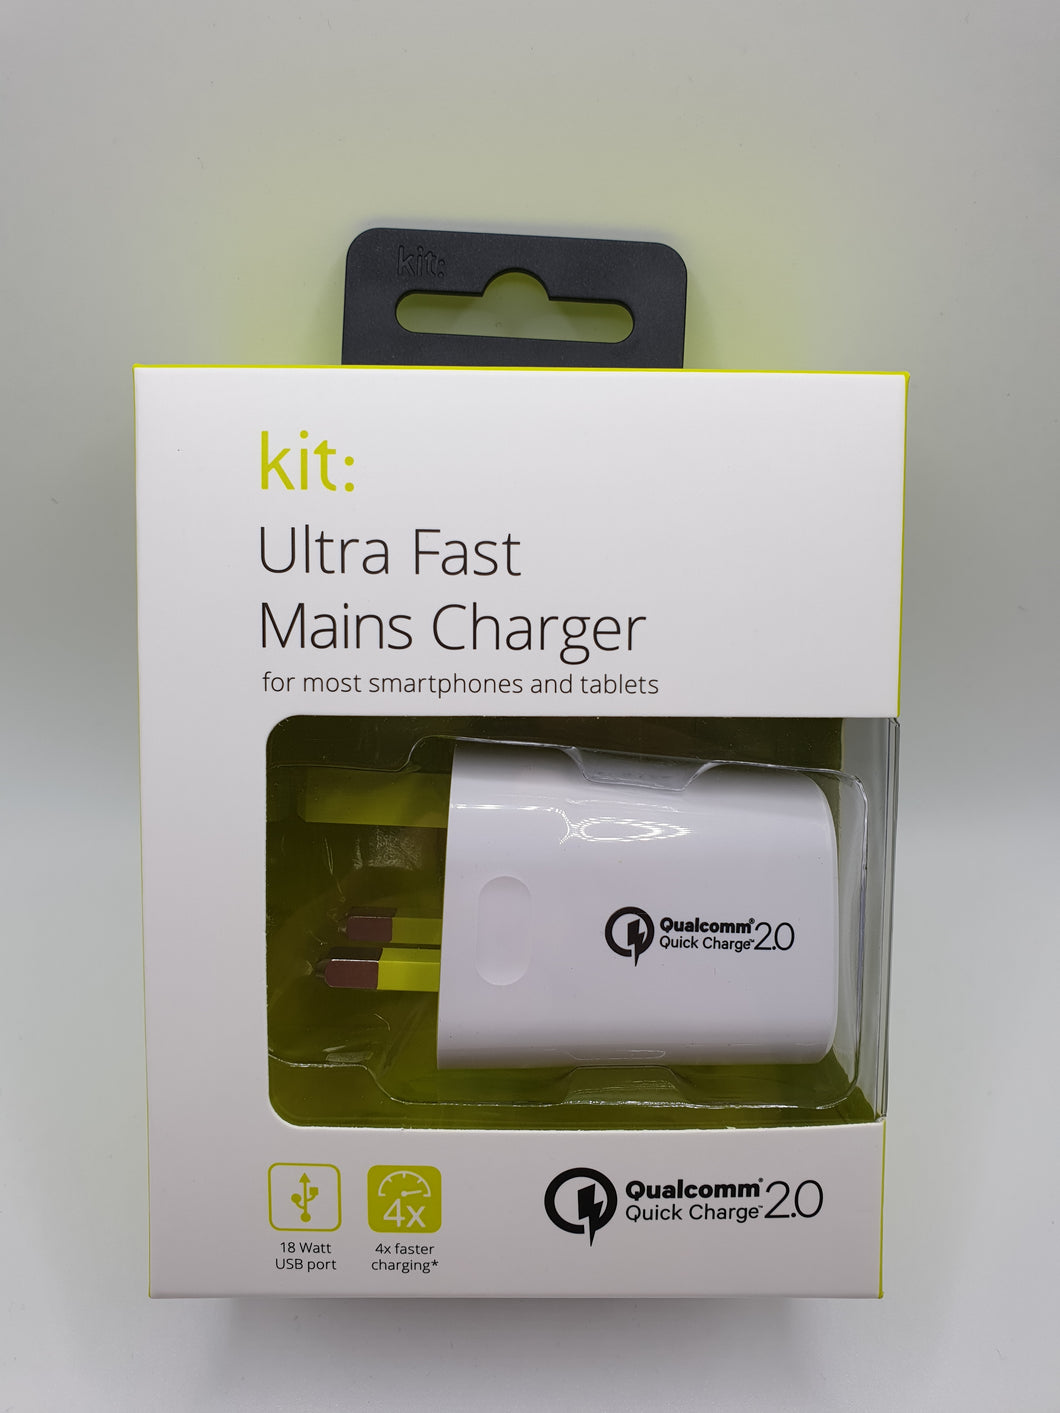 Kit Ultra Fast Mains USB Plug Charger Upto 4X Faster Than Standard Charger For Smartphones & Tablets